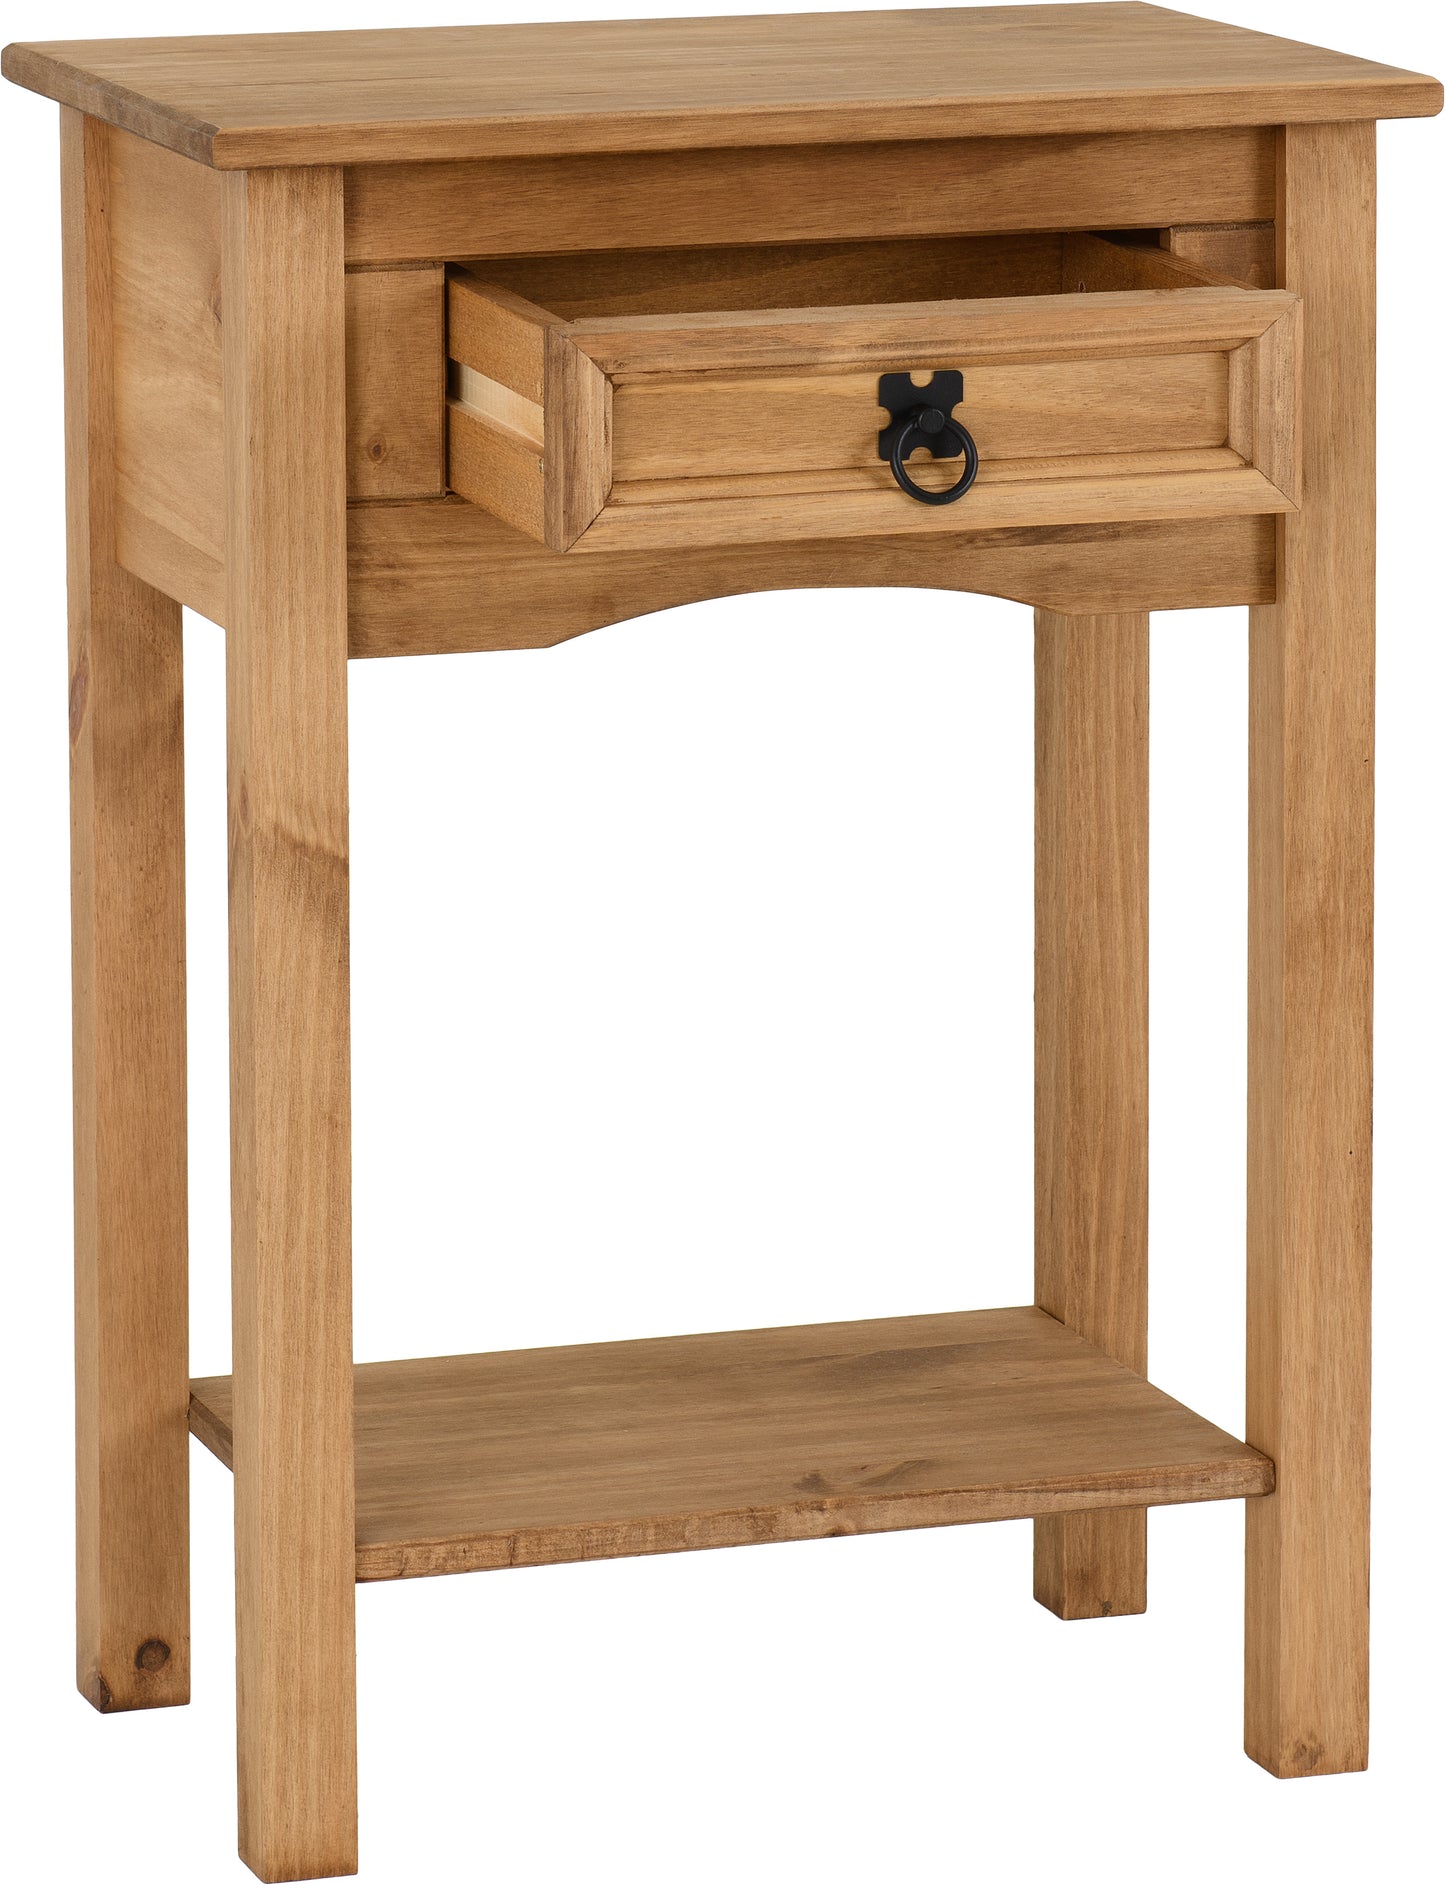 CORONA 1 DRAWER CONSOLE TABLE - DISTRESSED WAXED PINE